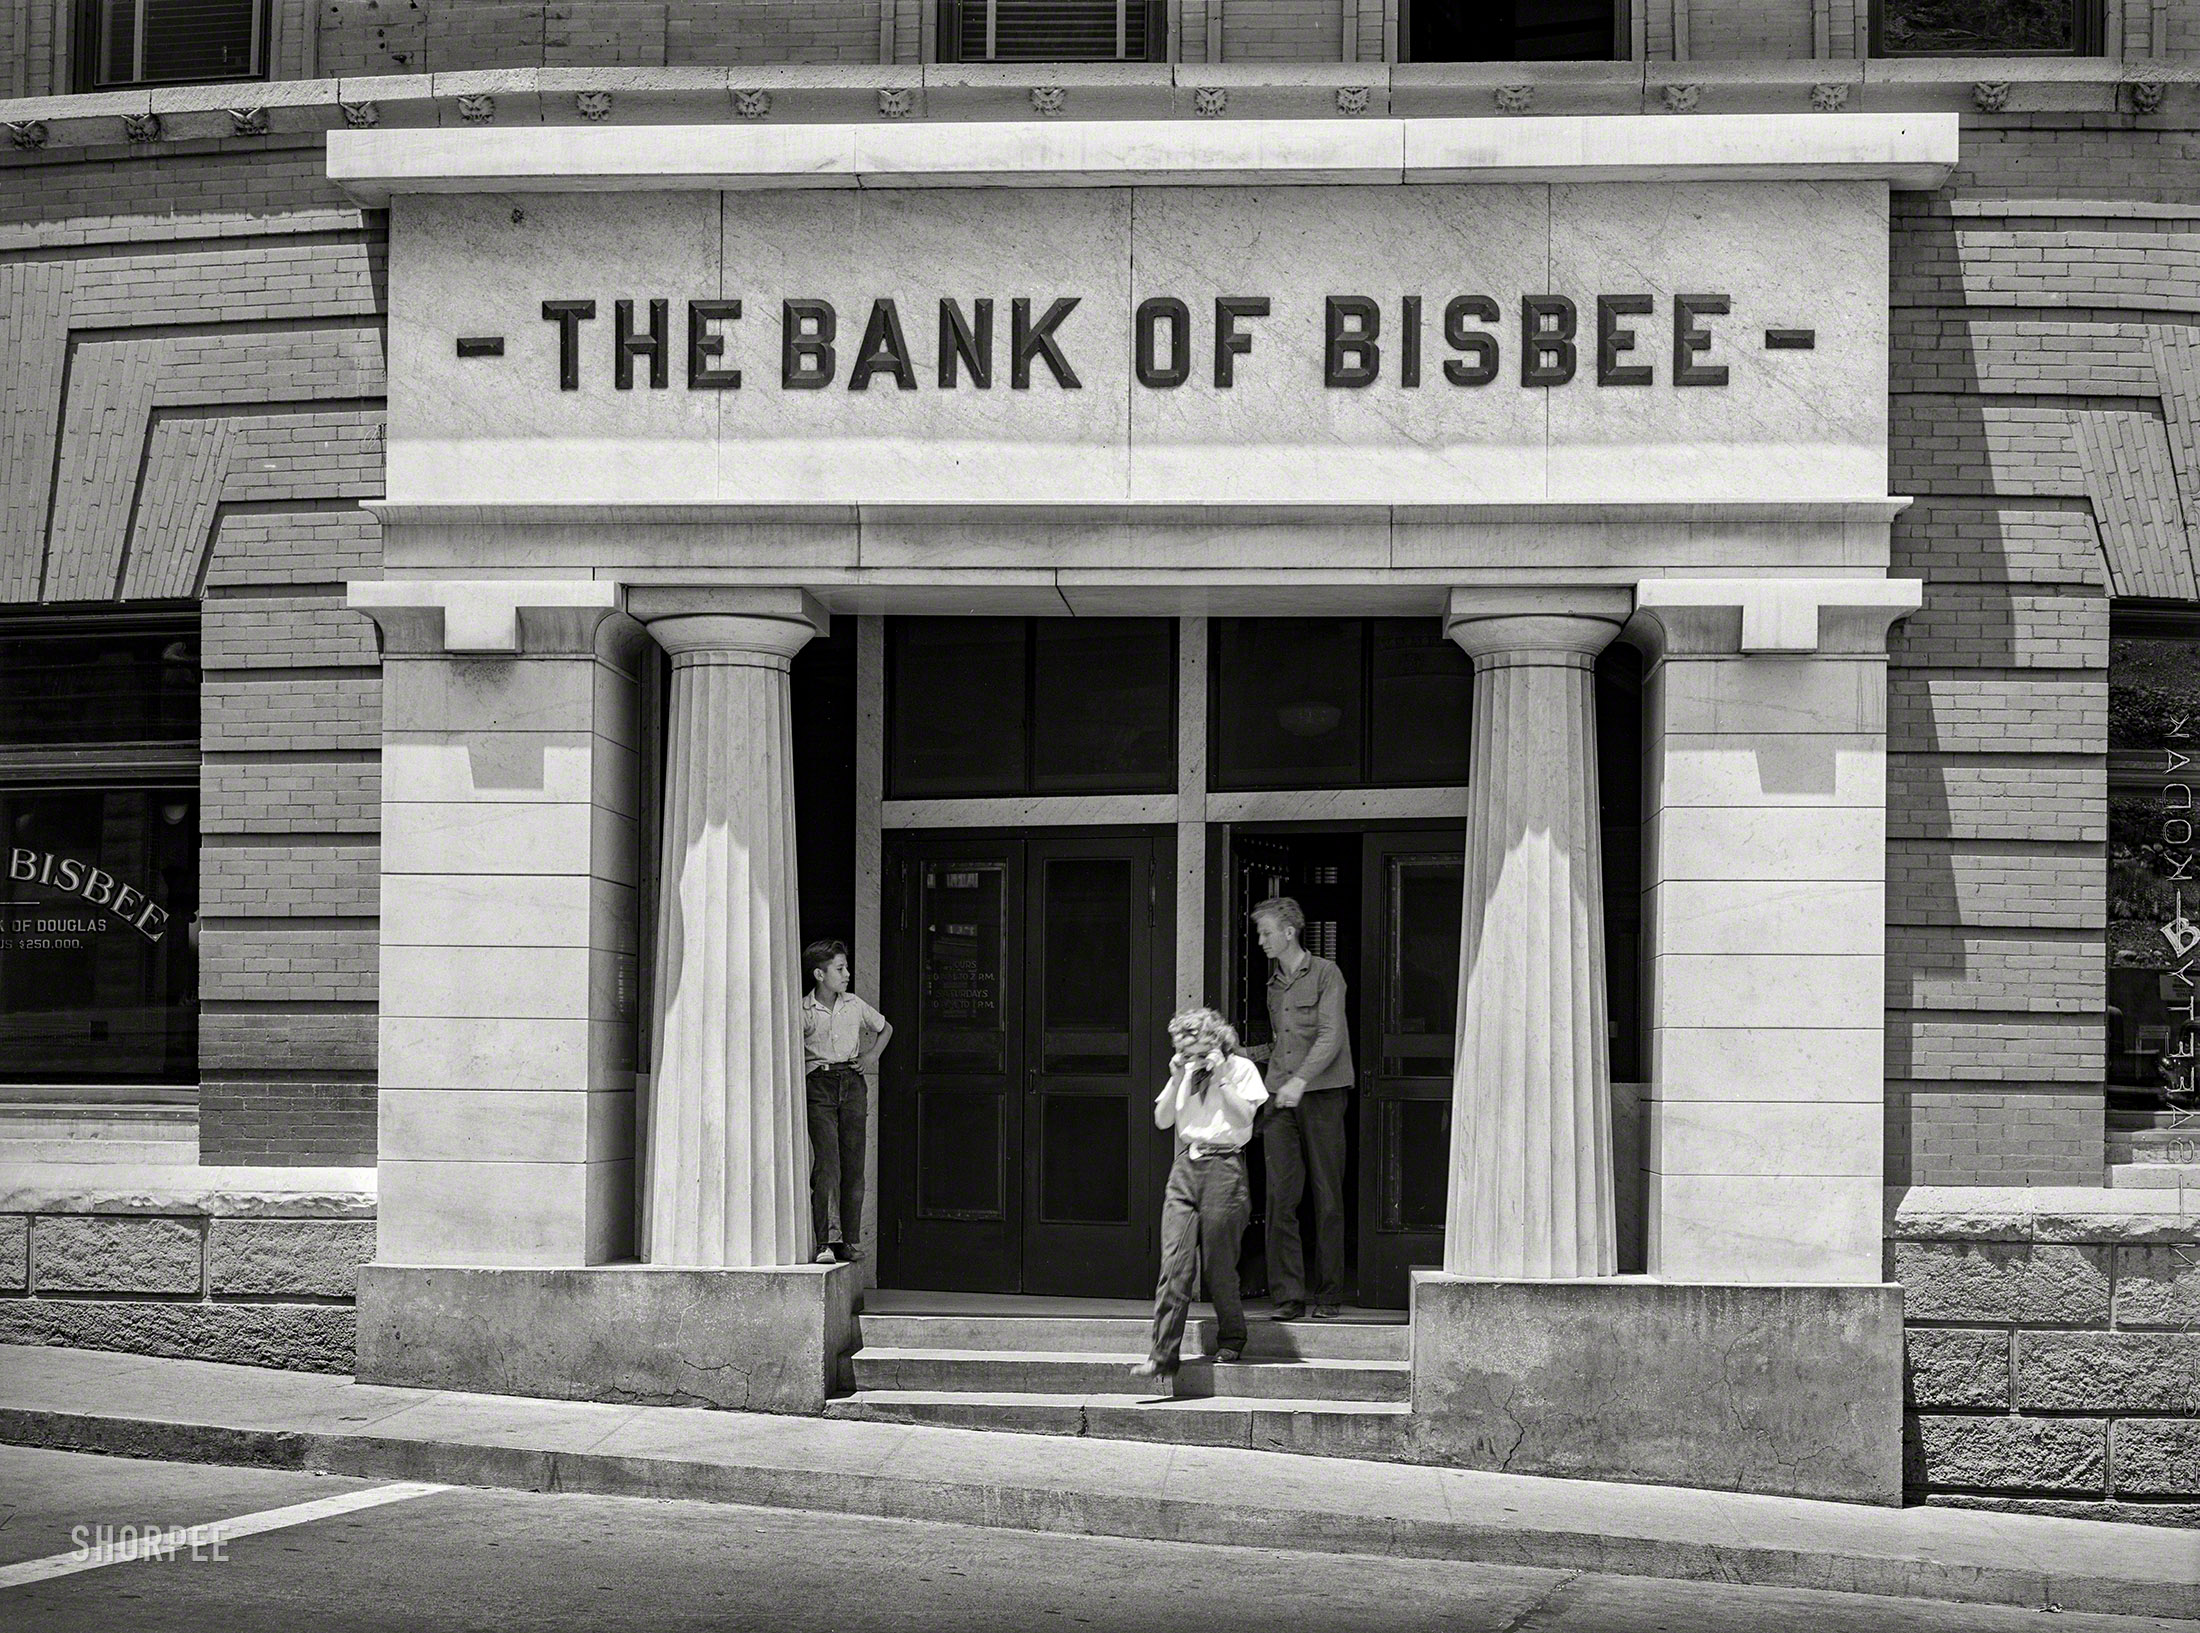 &nbsp; &nbsp; &nbsp; &nbsp; The Bank of Bisbee had a starring role in "Violent Saturday," a 1955 film noir shot on location with Bisbee recast as "Bradenville," and Ernest Borgnine somewhat improbably playing an Amish farmer whose family is held hostage by bank robbers.
May 1940. "Bank in copper mining center of Bisbee, Arizona." Medium format negative by Russell Lee for the Farm Security Administration. View full size.